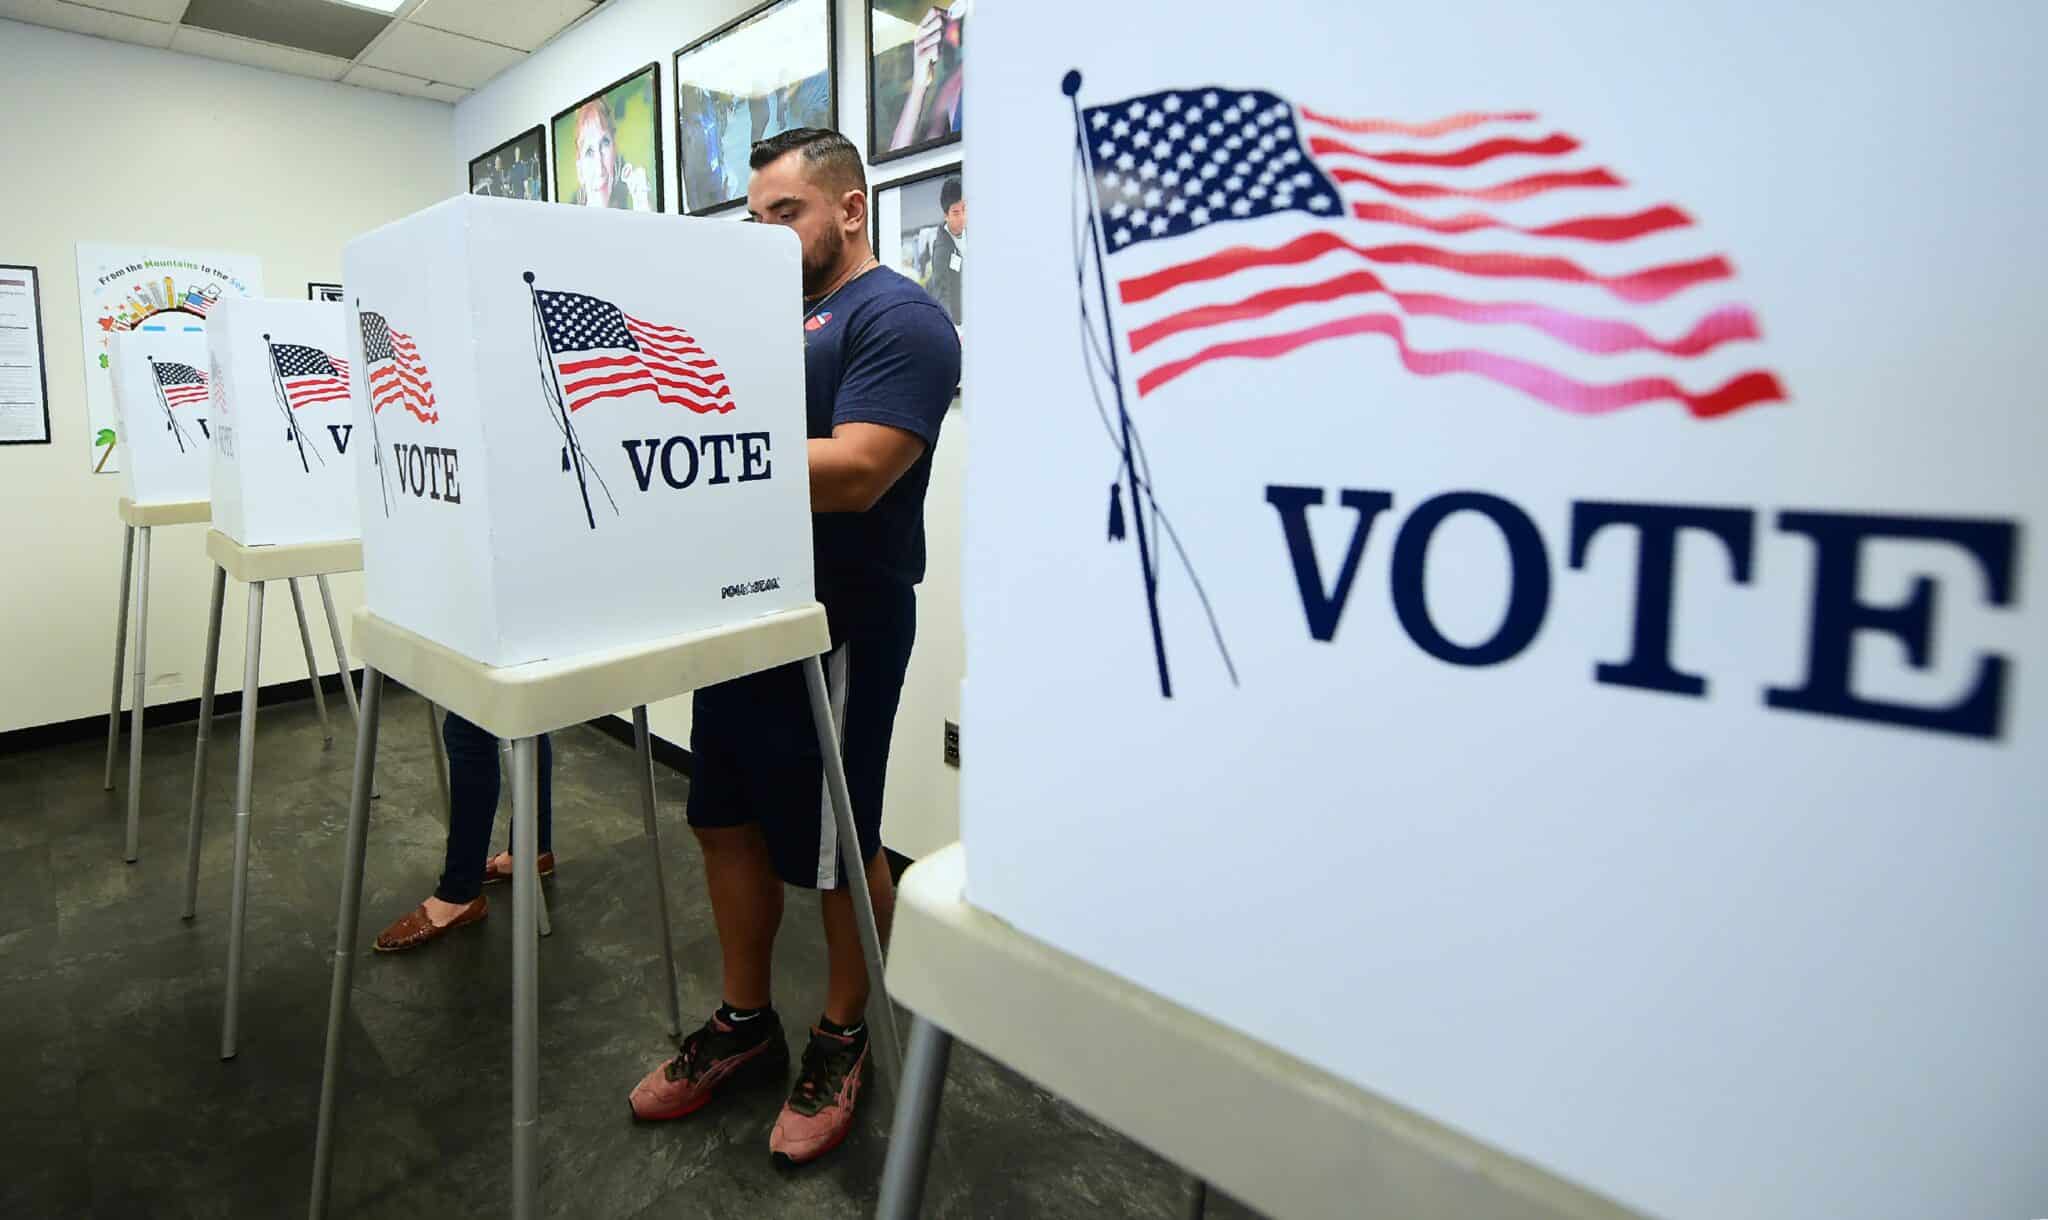 TOPSHOT - Voters cast their ballots for Early Voting at the Los Angeles County Registrar's Office in Norwalk, California on November 5, 2018, a day ahead the November 6 midterm elections in the United States. (Photo by Frederic J. BROWN / AFP)        (Photo credit should read FREDERIC J. BROWN/AFP via Getty Images)